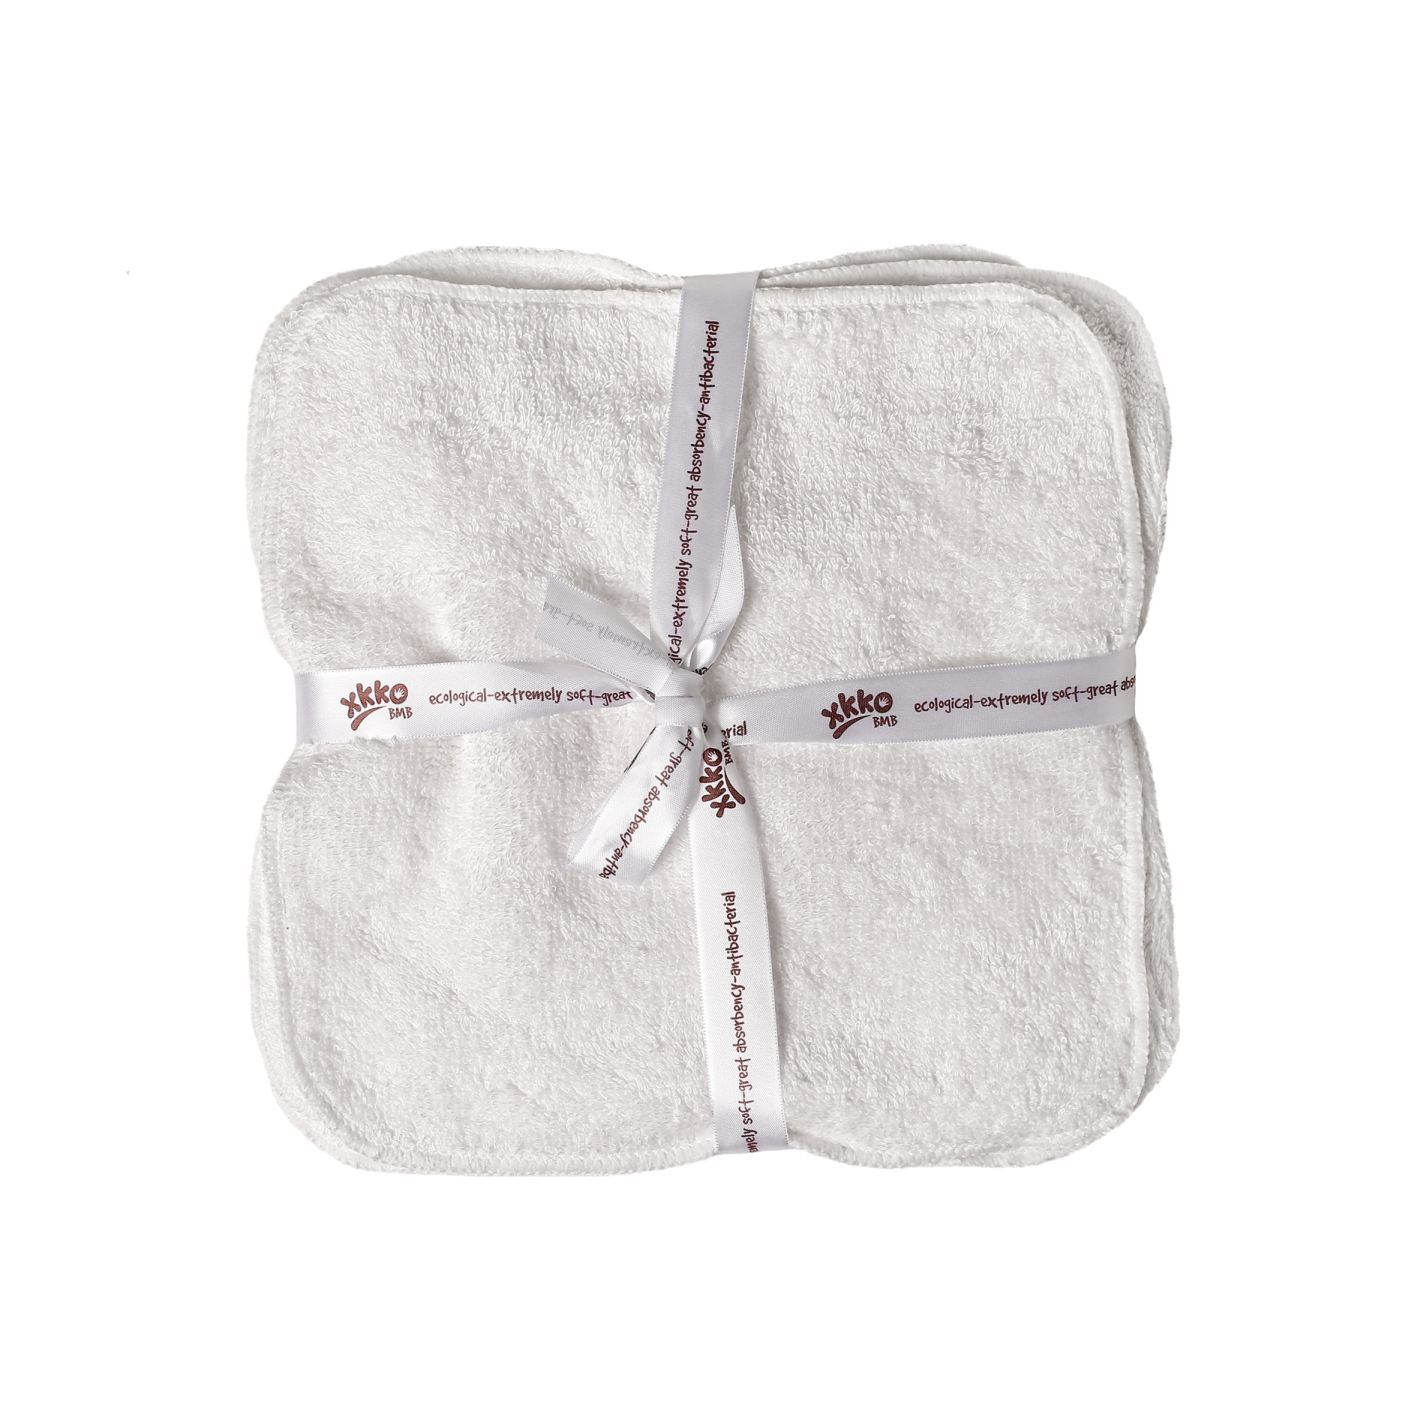 We recommend our Bamboo washcloths XKKO BMB 21x21 - Natural - the goods ...